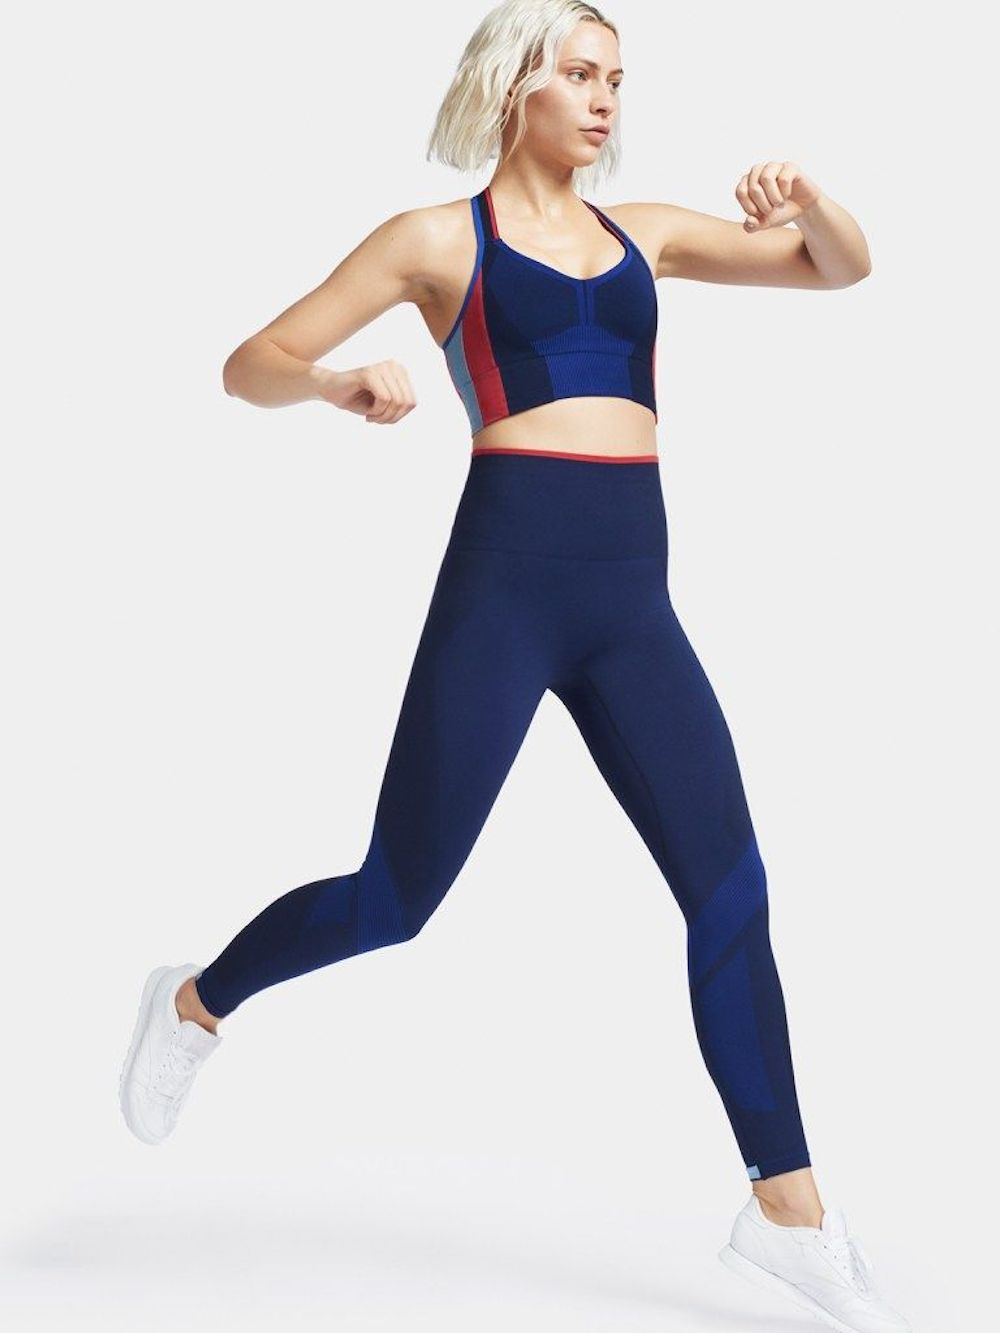 13 Activewear Lines We're Obsessed With - Camille Styles